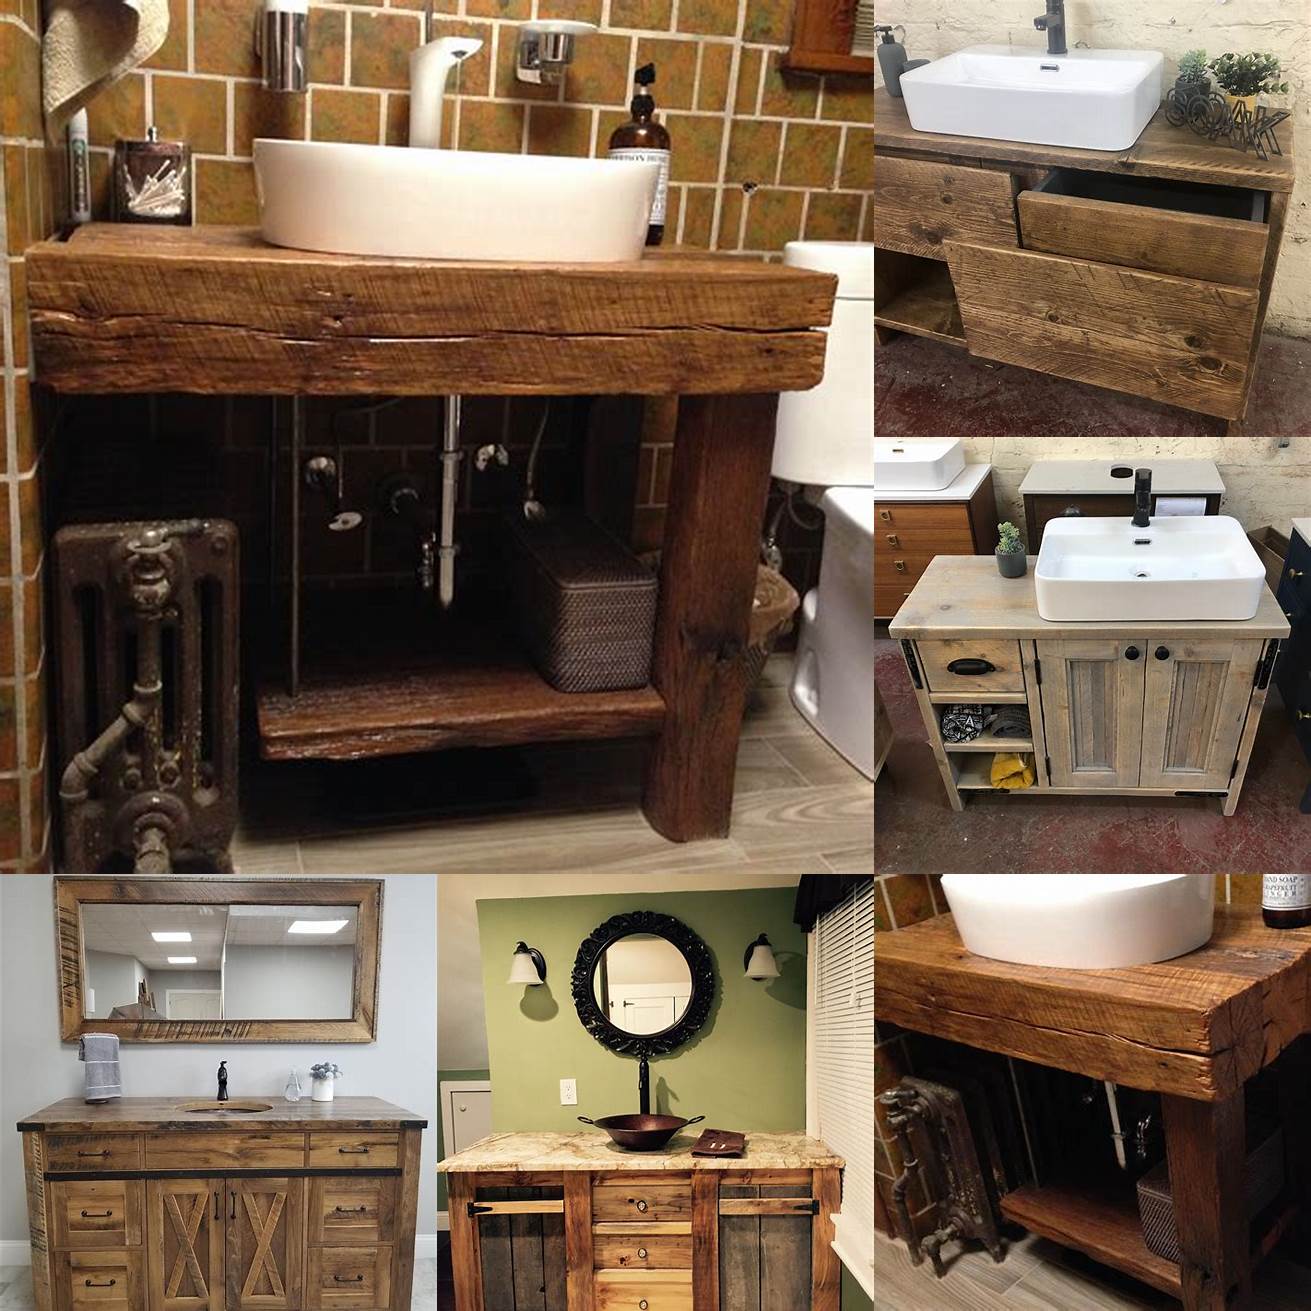 A rustic vanity made from reclaimed wood